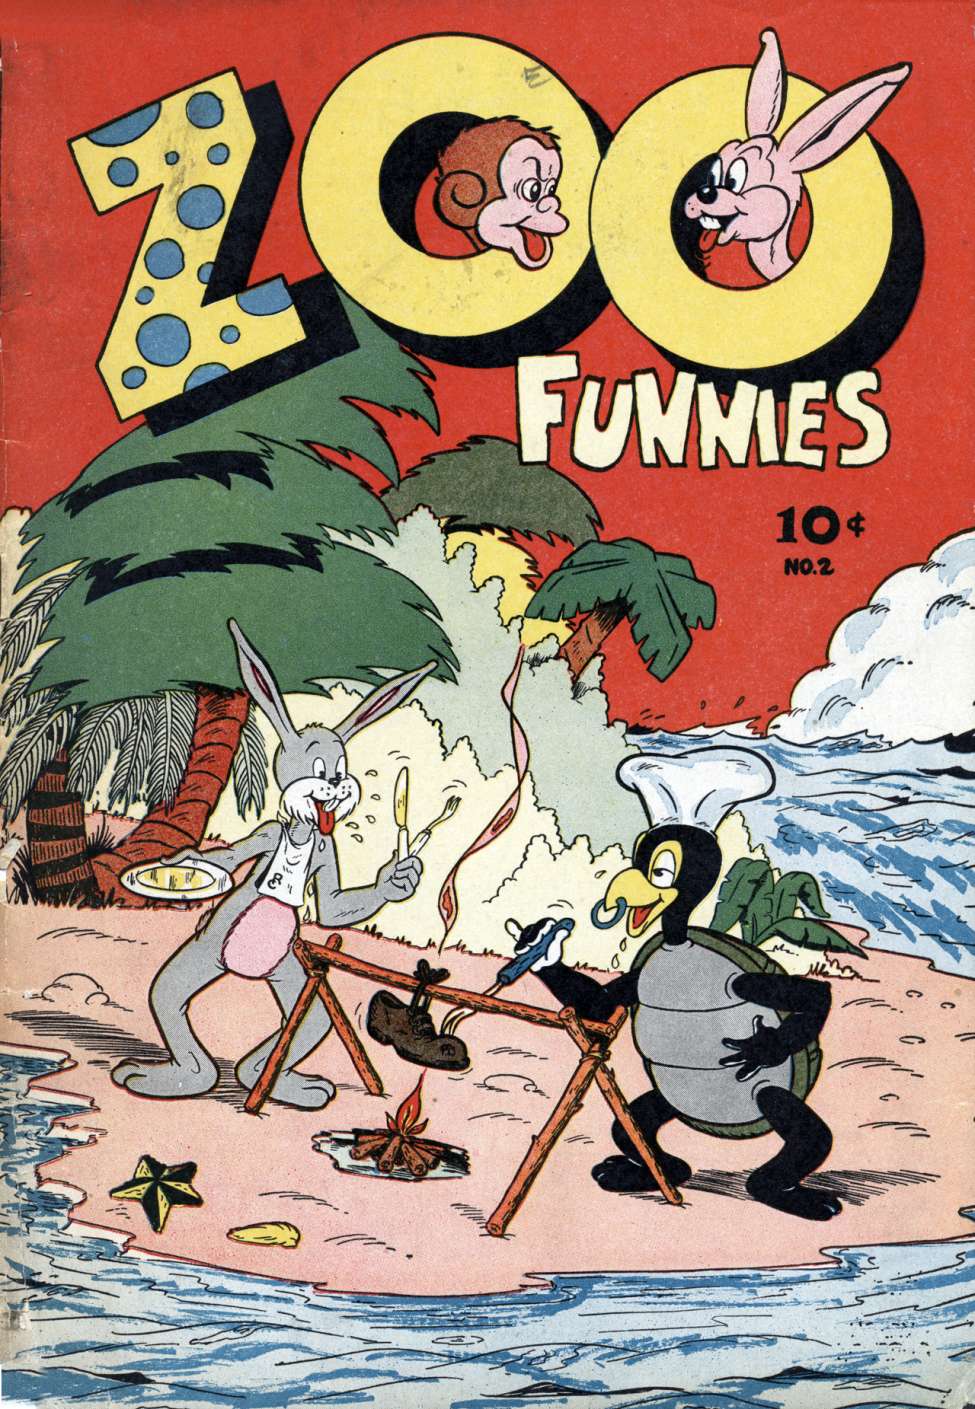 Book Cover For Zoo Funnies v1 2